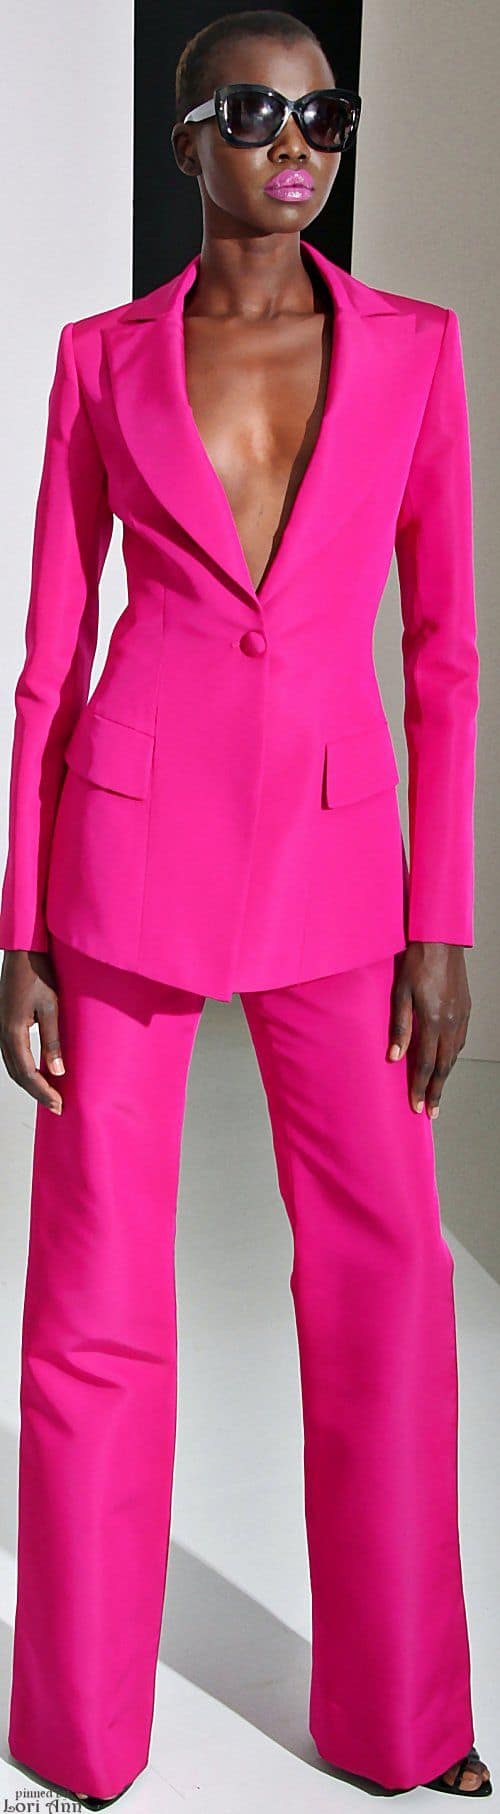 colors that go with fuchsia pink suit